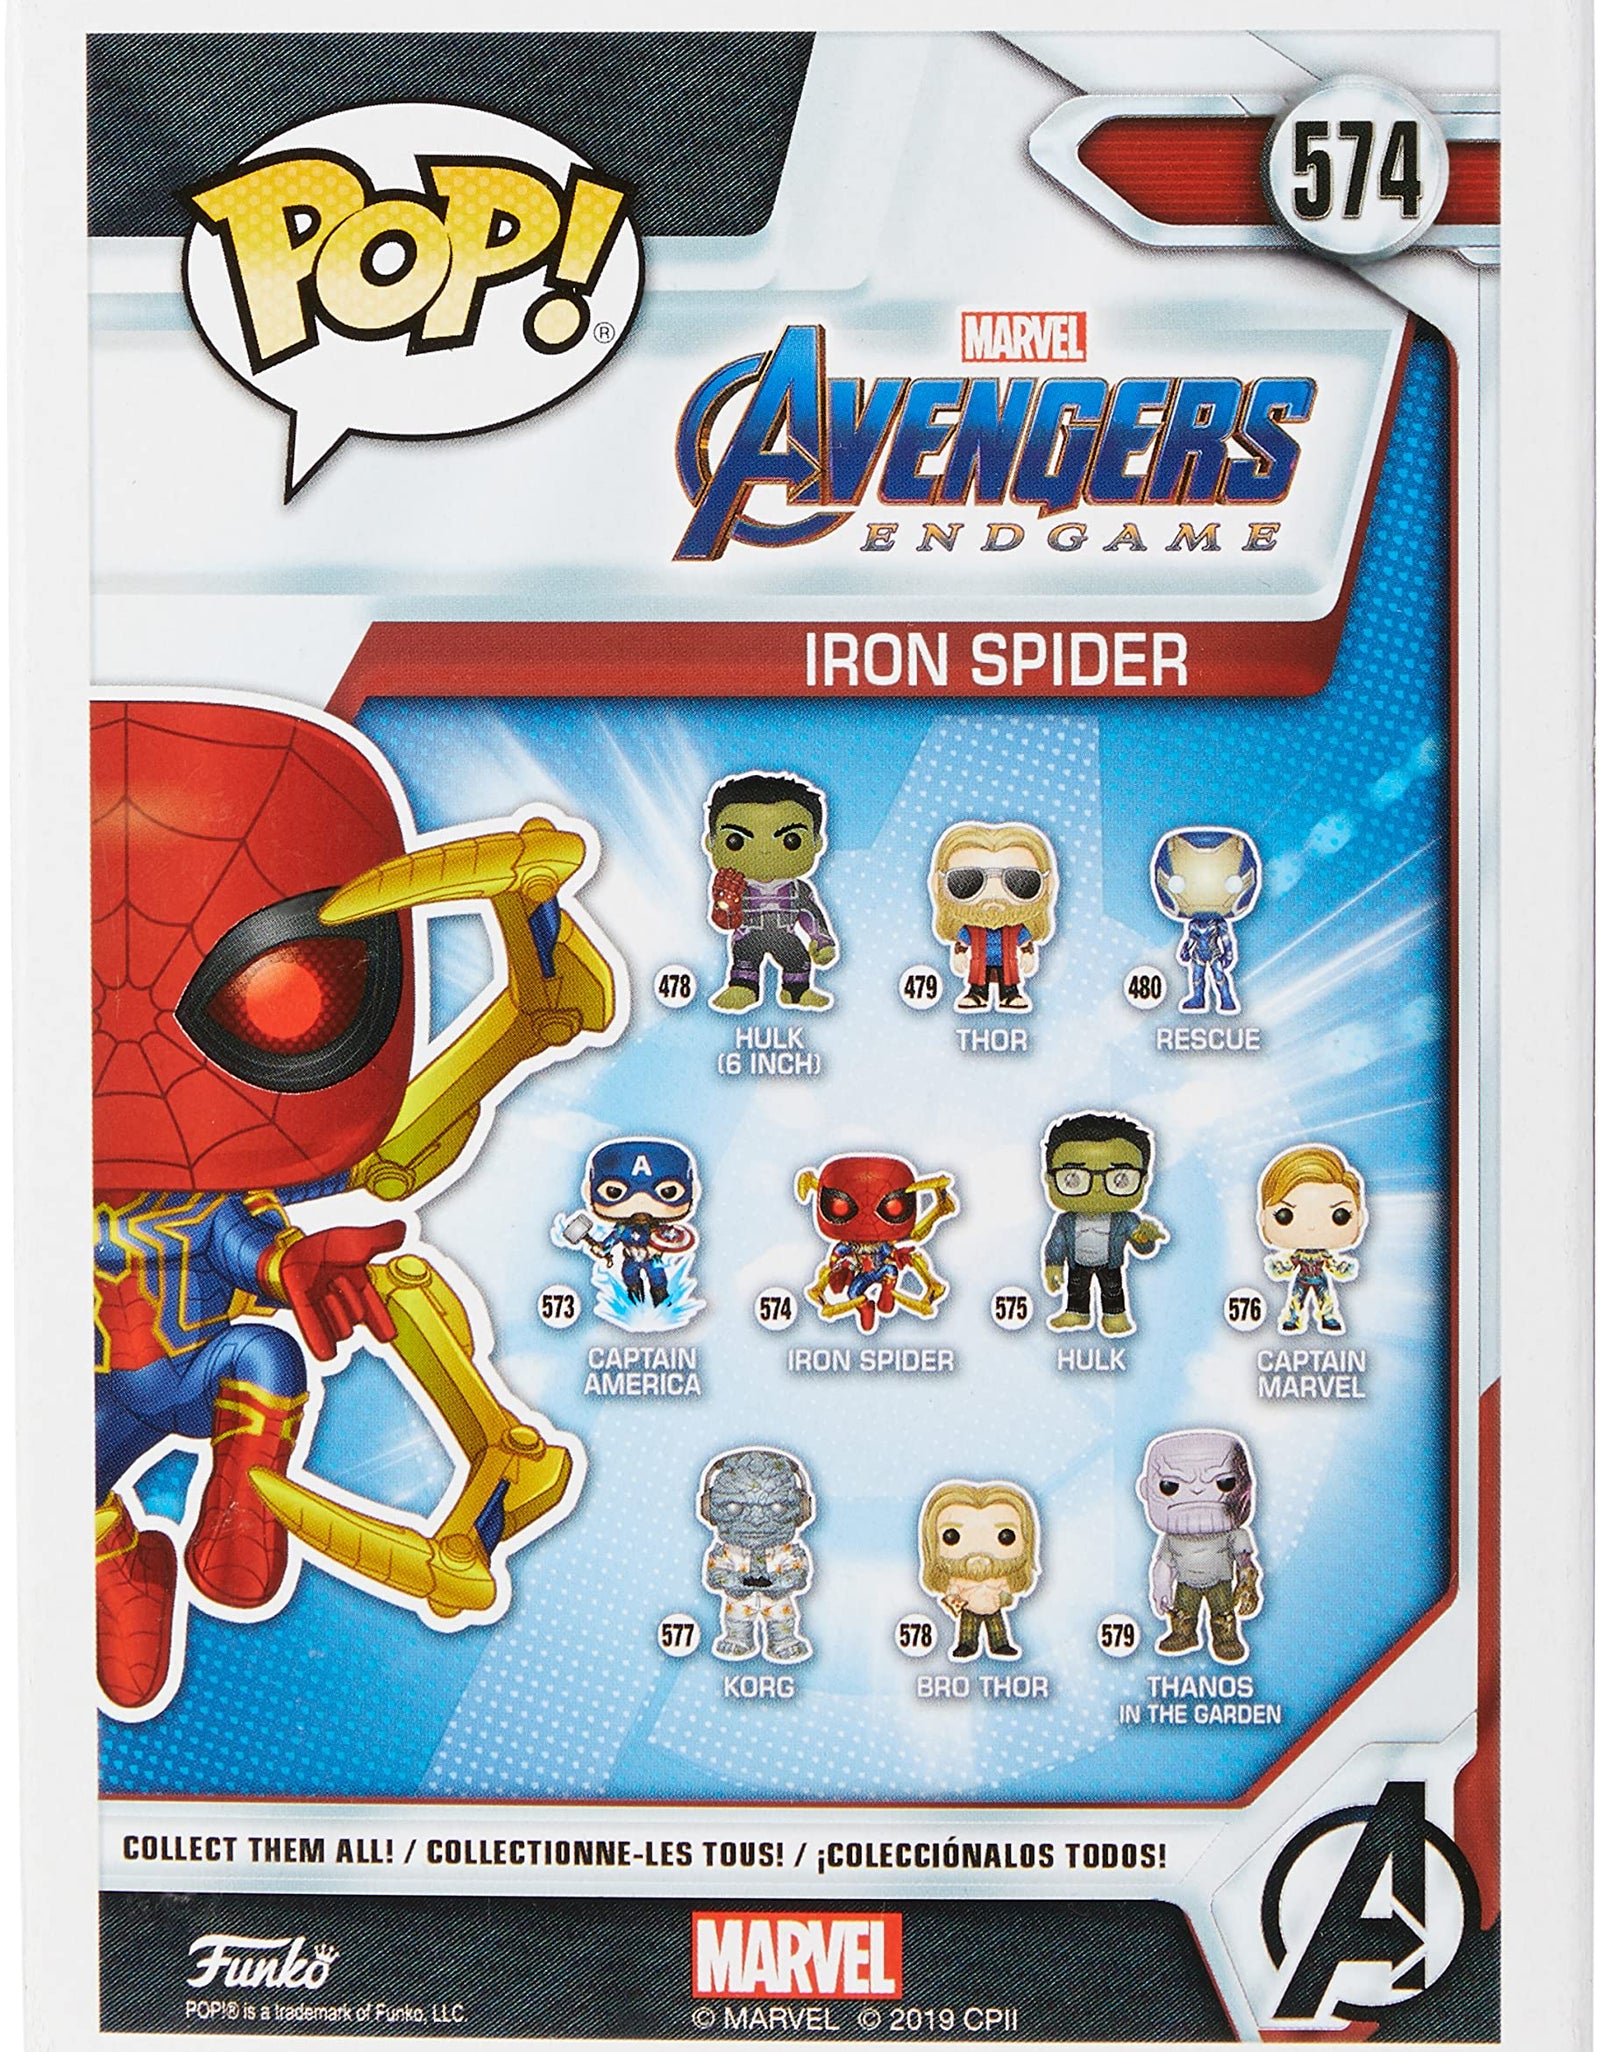 Funko Pop! Marvel: Avengers Endgame - Iron Spider with Nano Gauntlet, Multicolor (45138),3.75 inches